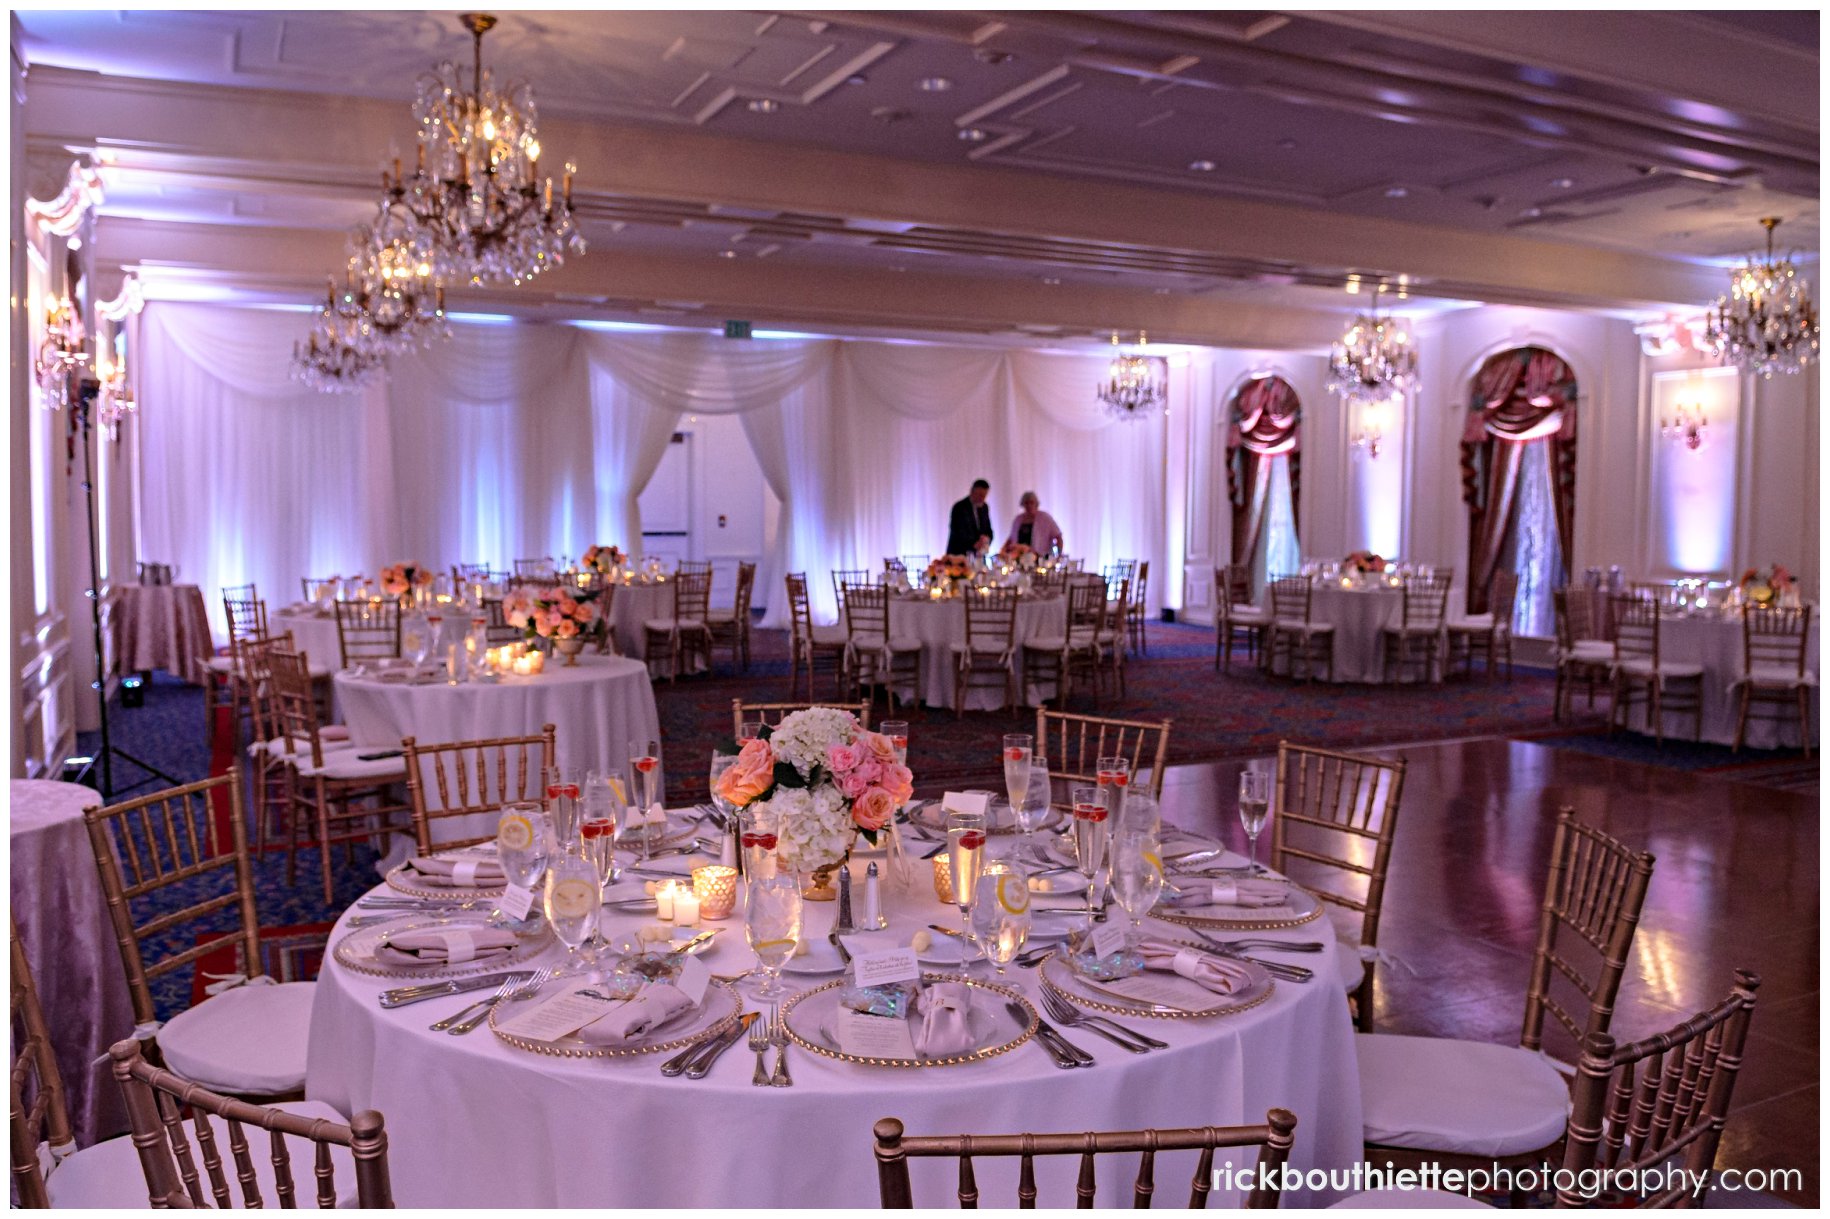 The Grand Ballroom at the Wentworth By The Sea decorated for a wedding reception